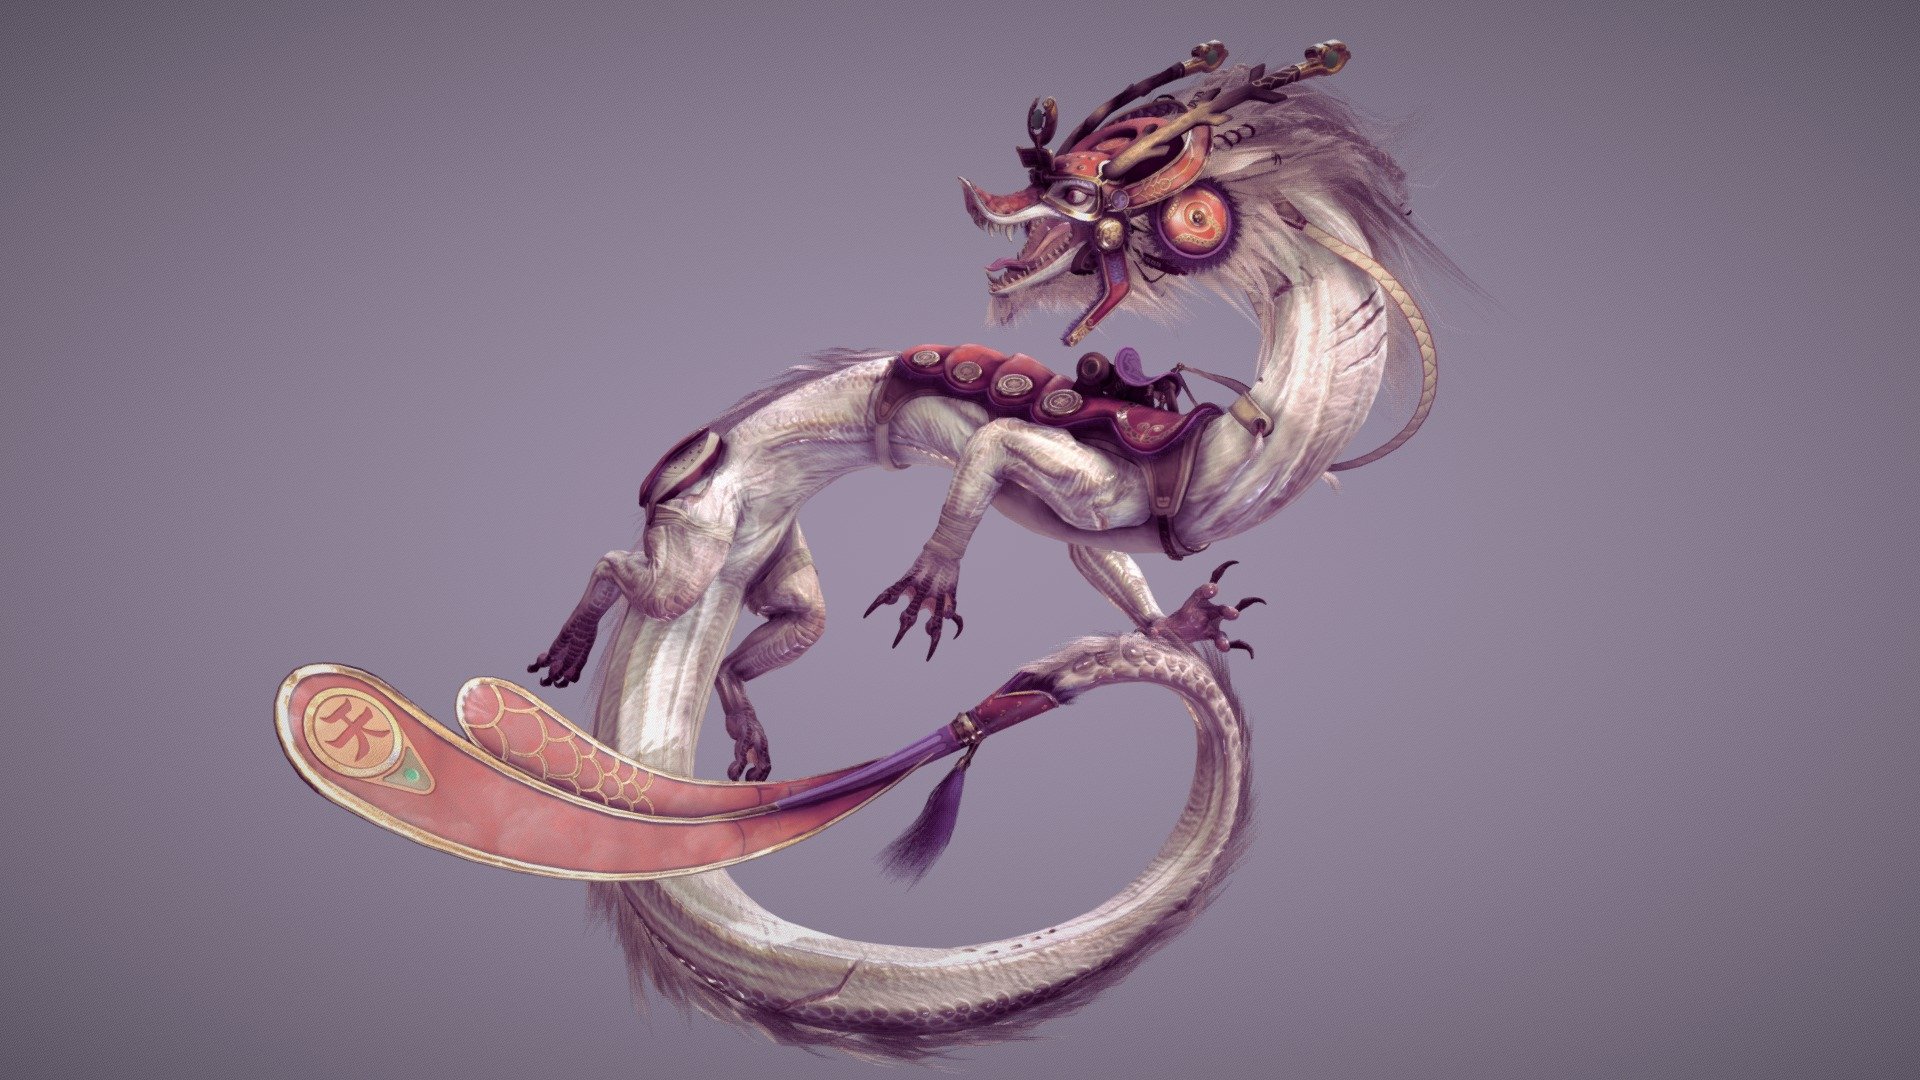 My work for Dragon's Rise: The Forgotten Realms Challenge.
Thanks to Mole Wang for the great design! - Chinese dragon - 3D model by Arhirasoul 3d model